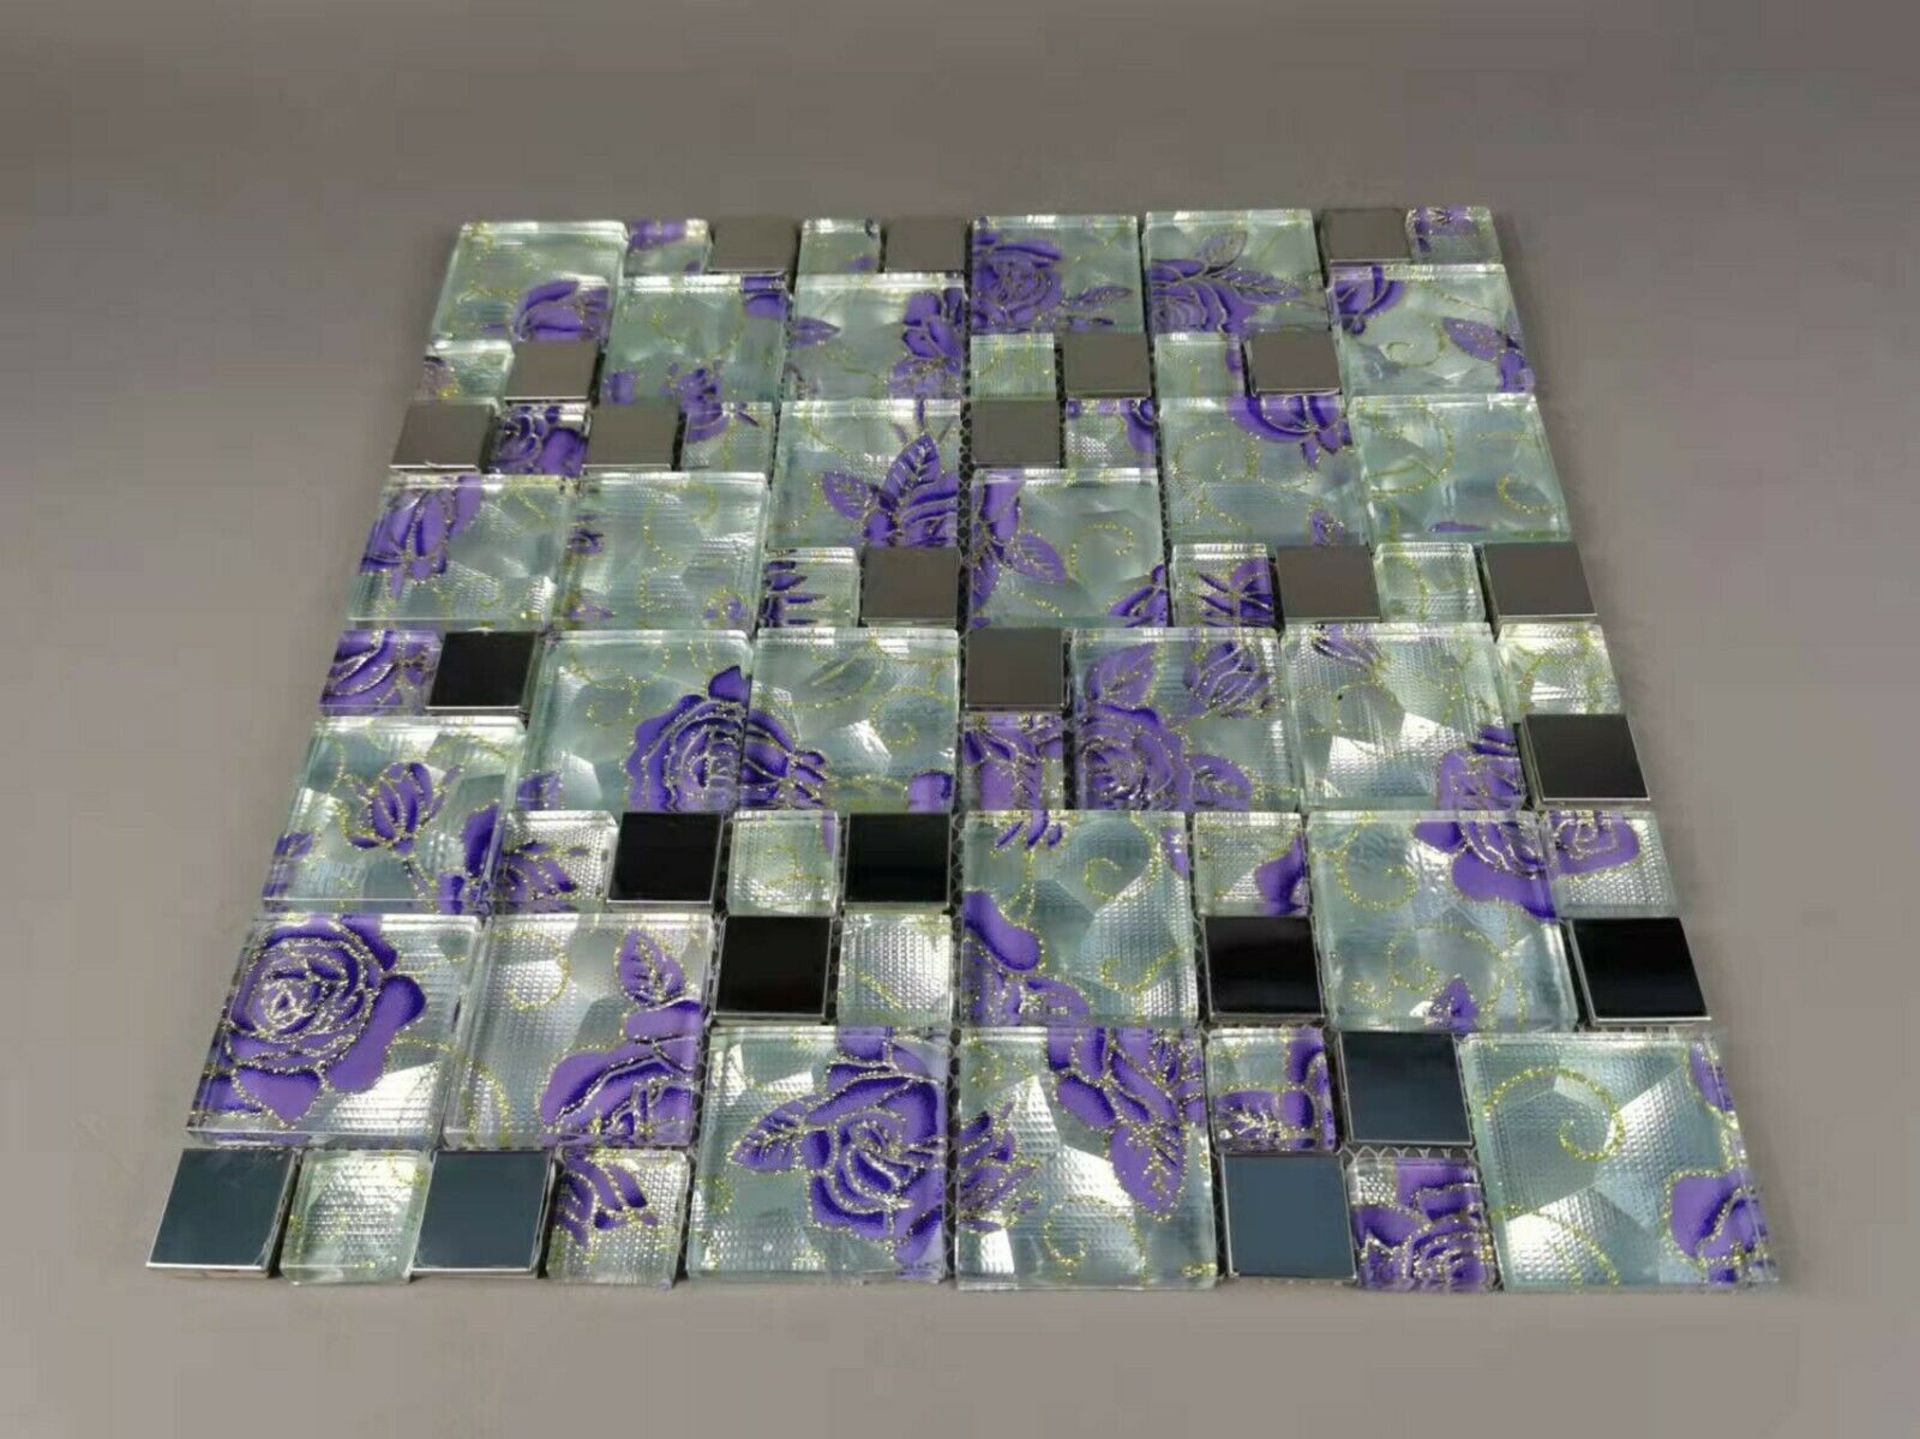 5 Square Metres - High Quality Glass/Stainless Steel Mosaic Tiles - Image 2 of 5